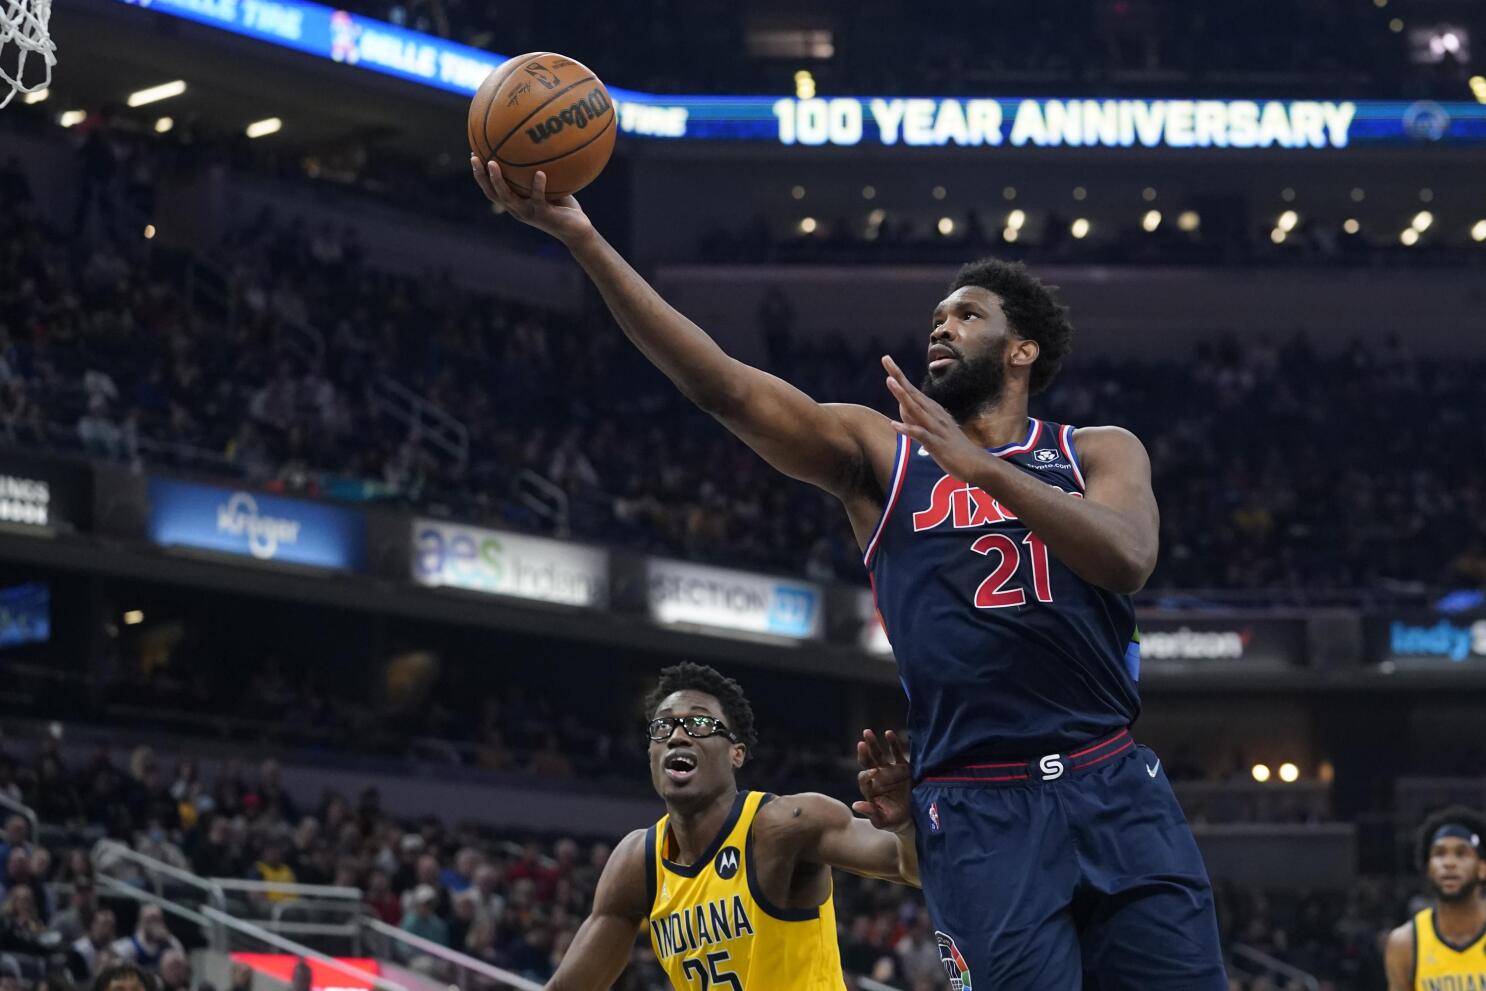 Cavaliers use fourth-quarter run to overtake Pacers